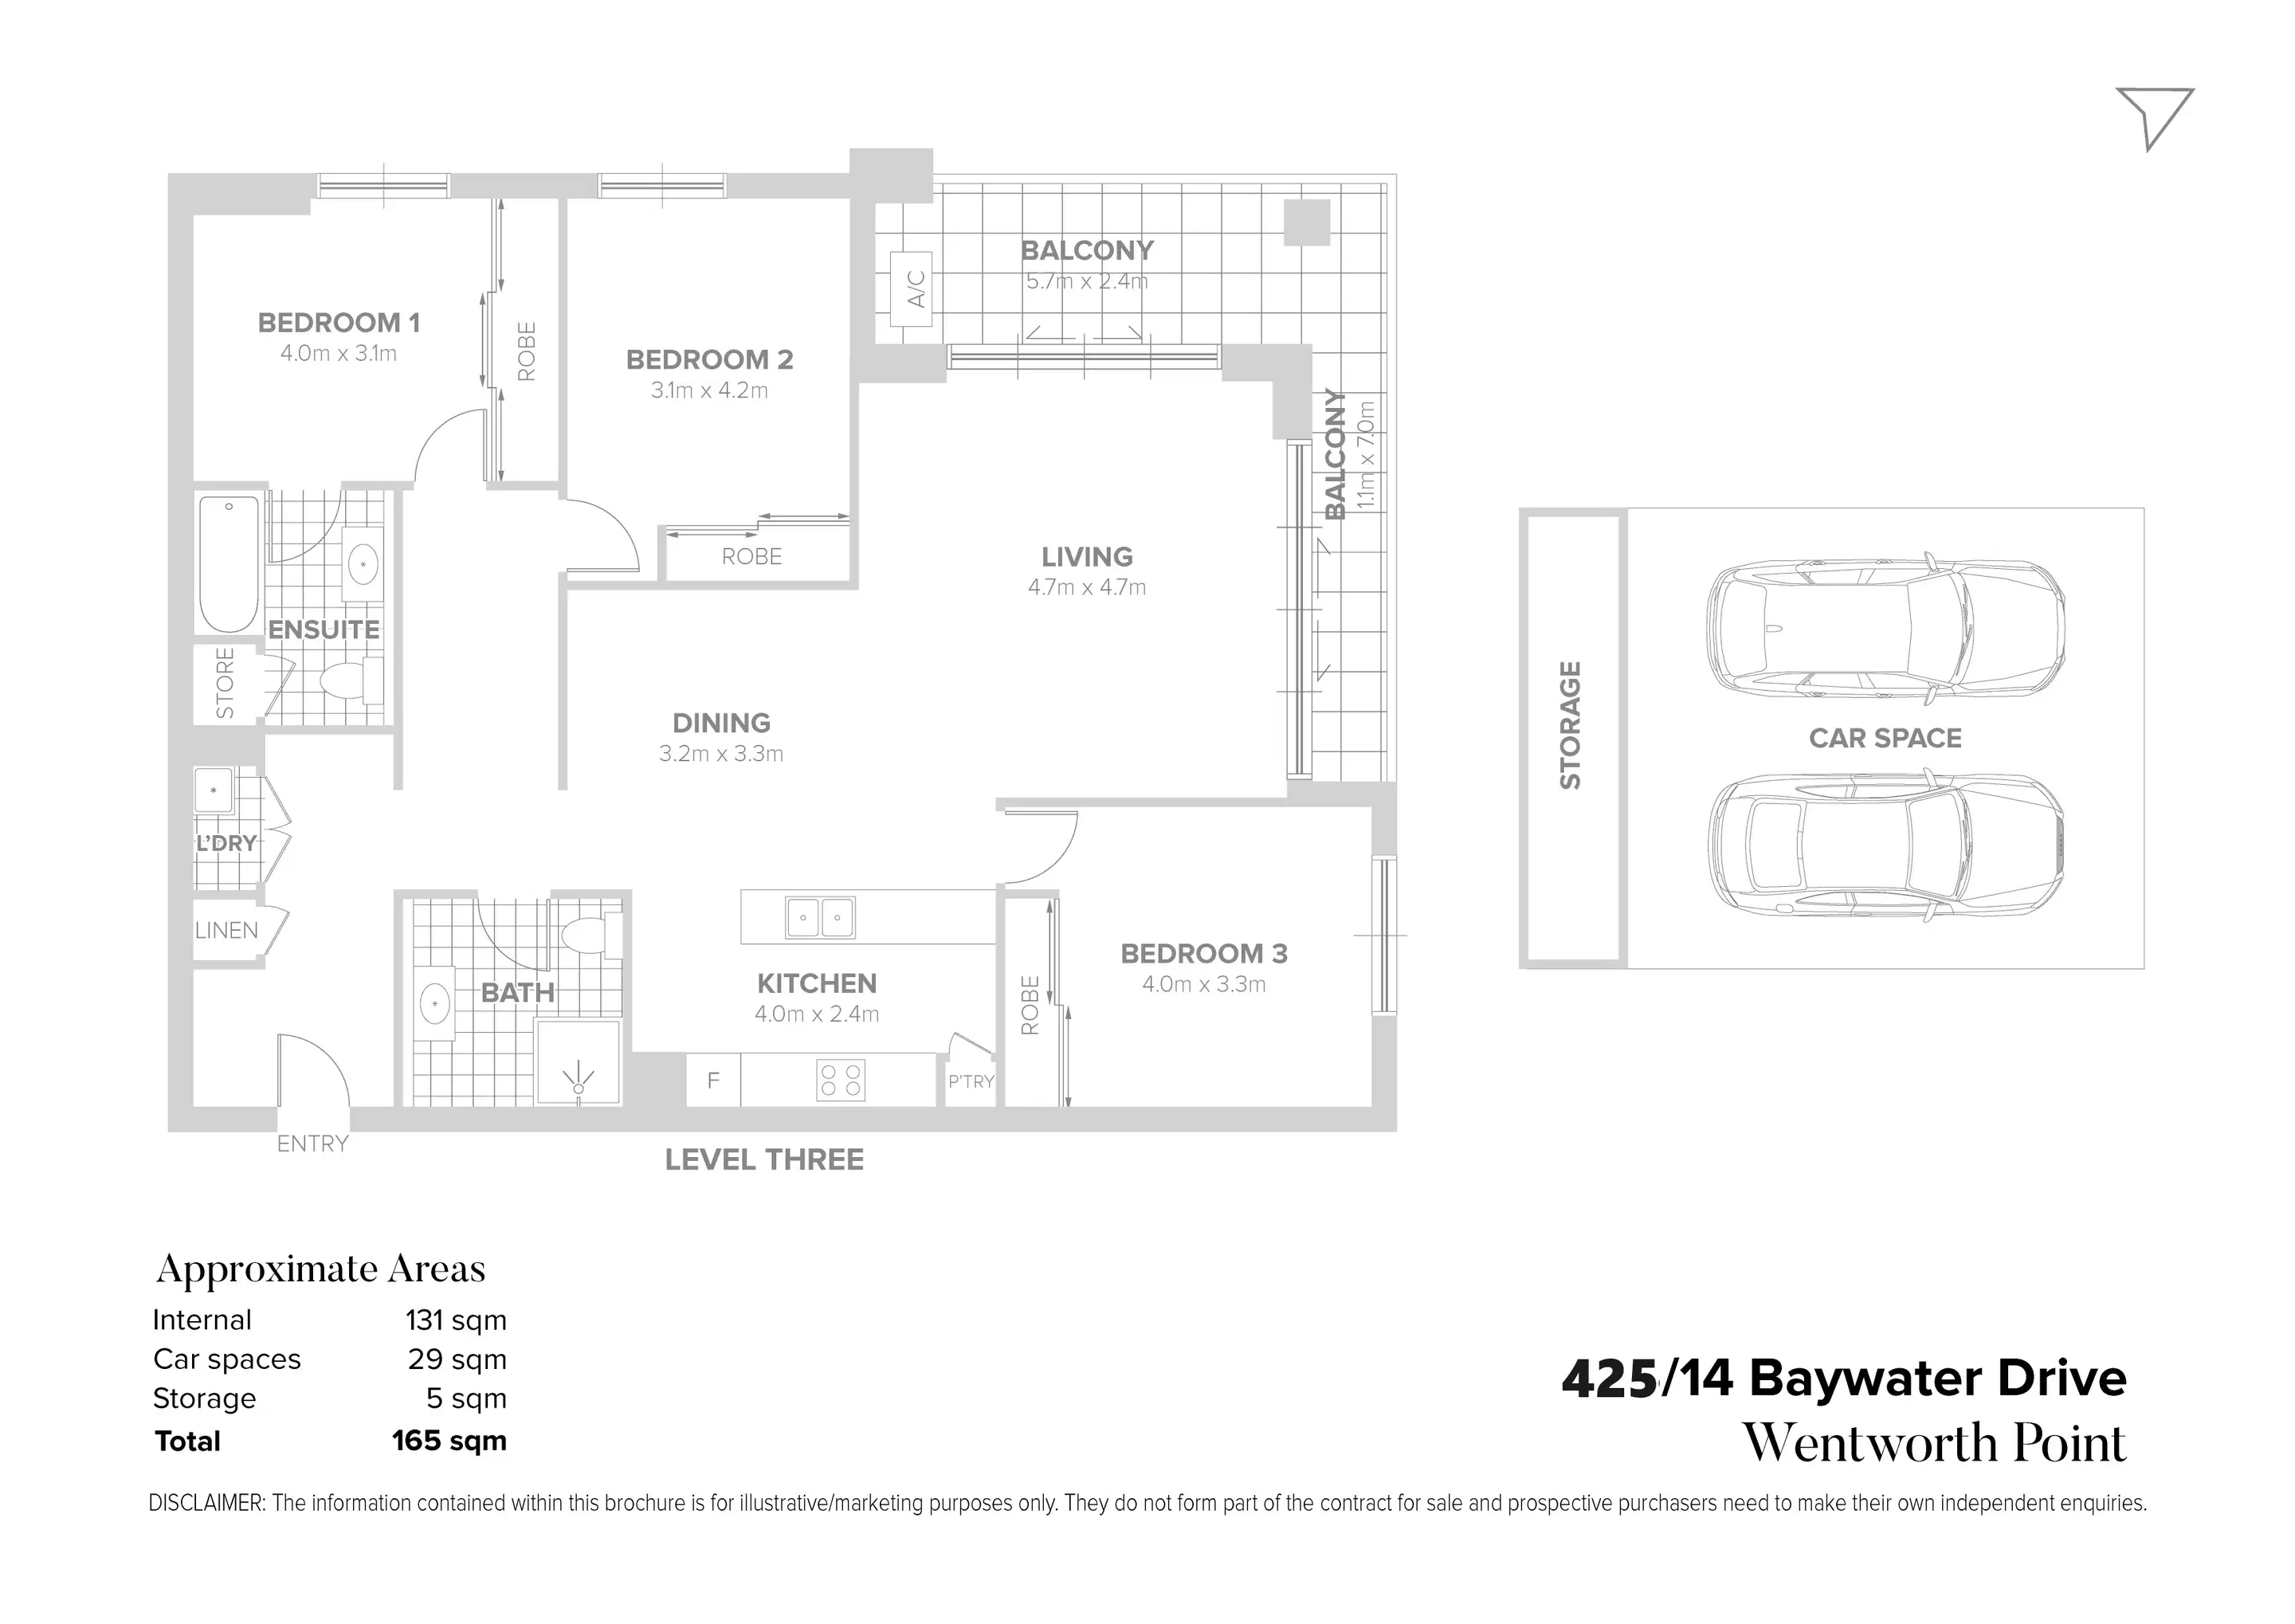 425/14 Baywater Drive, Wentworth Point Sold by Chidiac Realty - floorplan